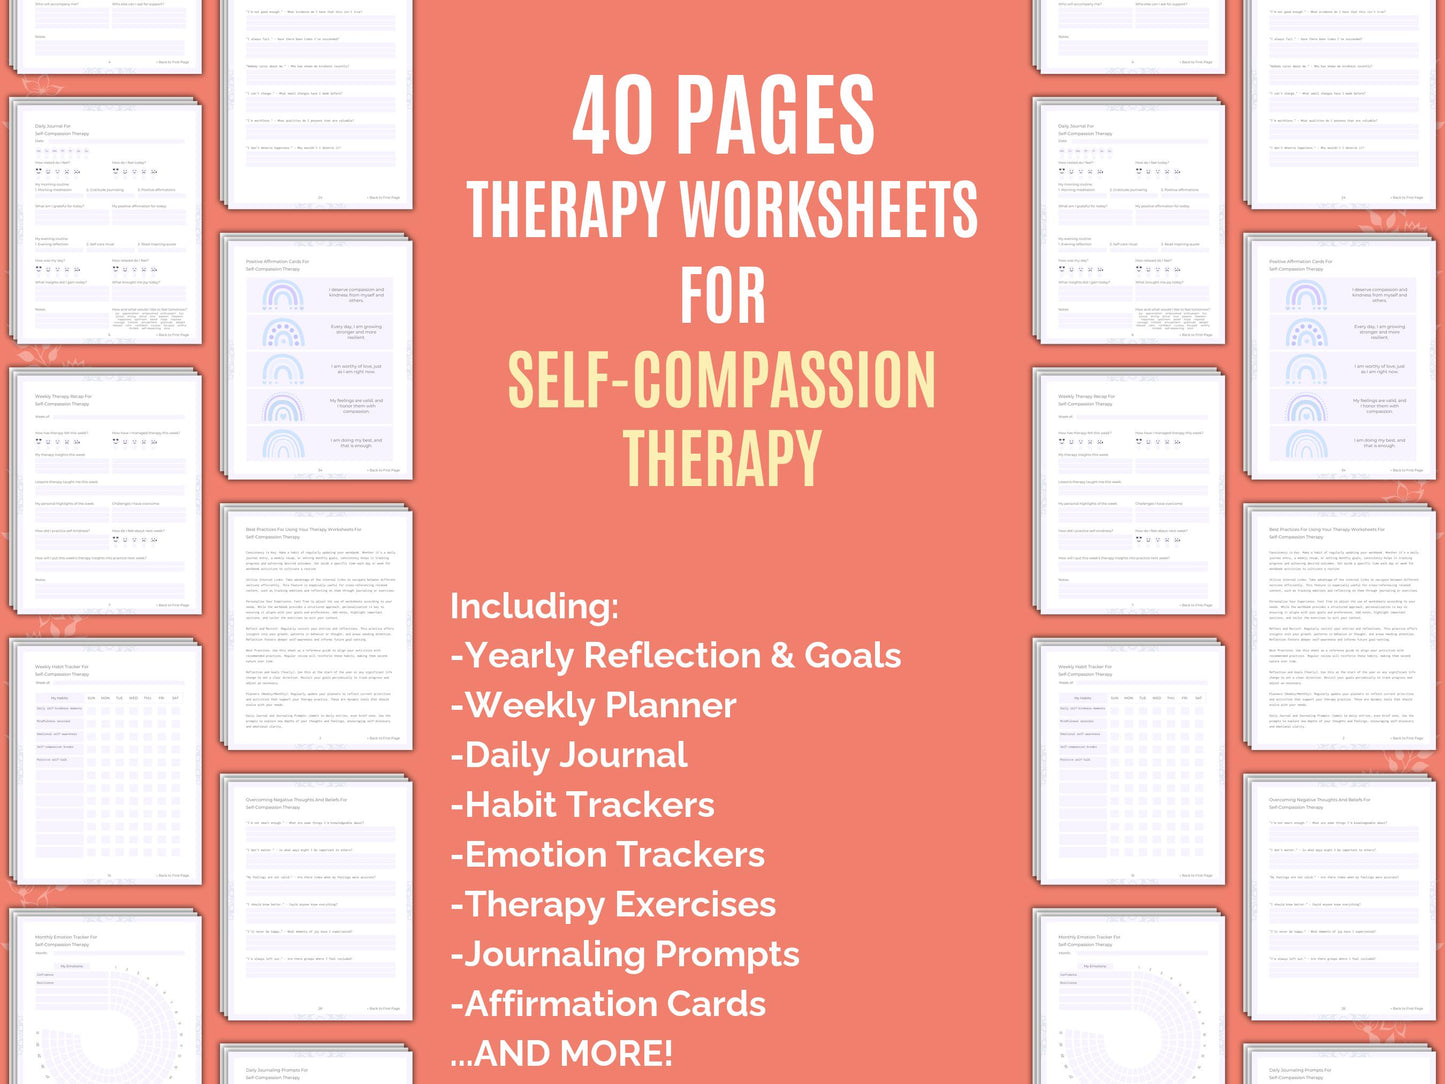 Notes, Counseling, Cheat Sheet, Planners, Workbooks, Templates, Self-Compassion Therapy, Tools, Resources, Therapy, Journals, Goal Setting, Journaling